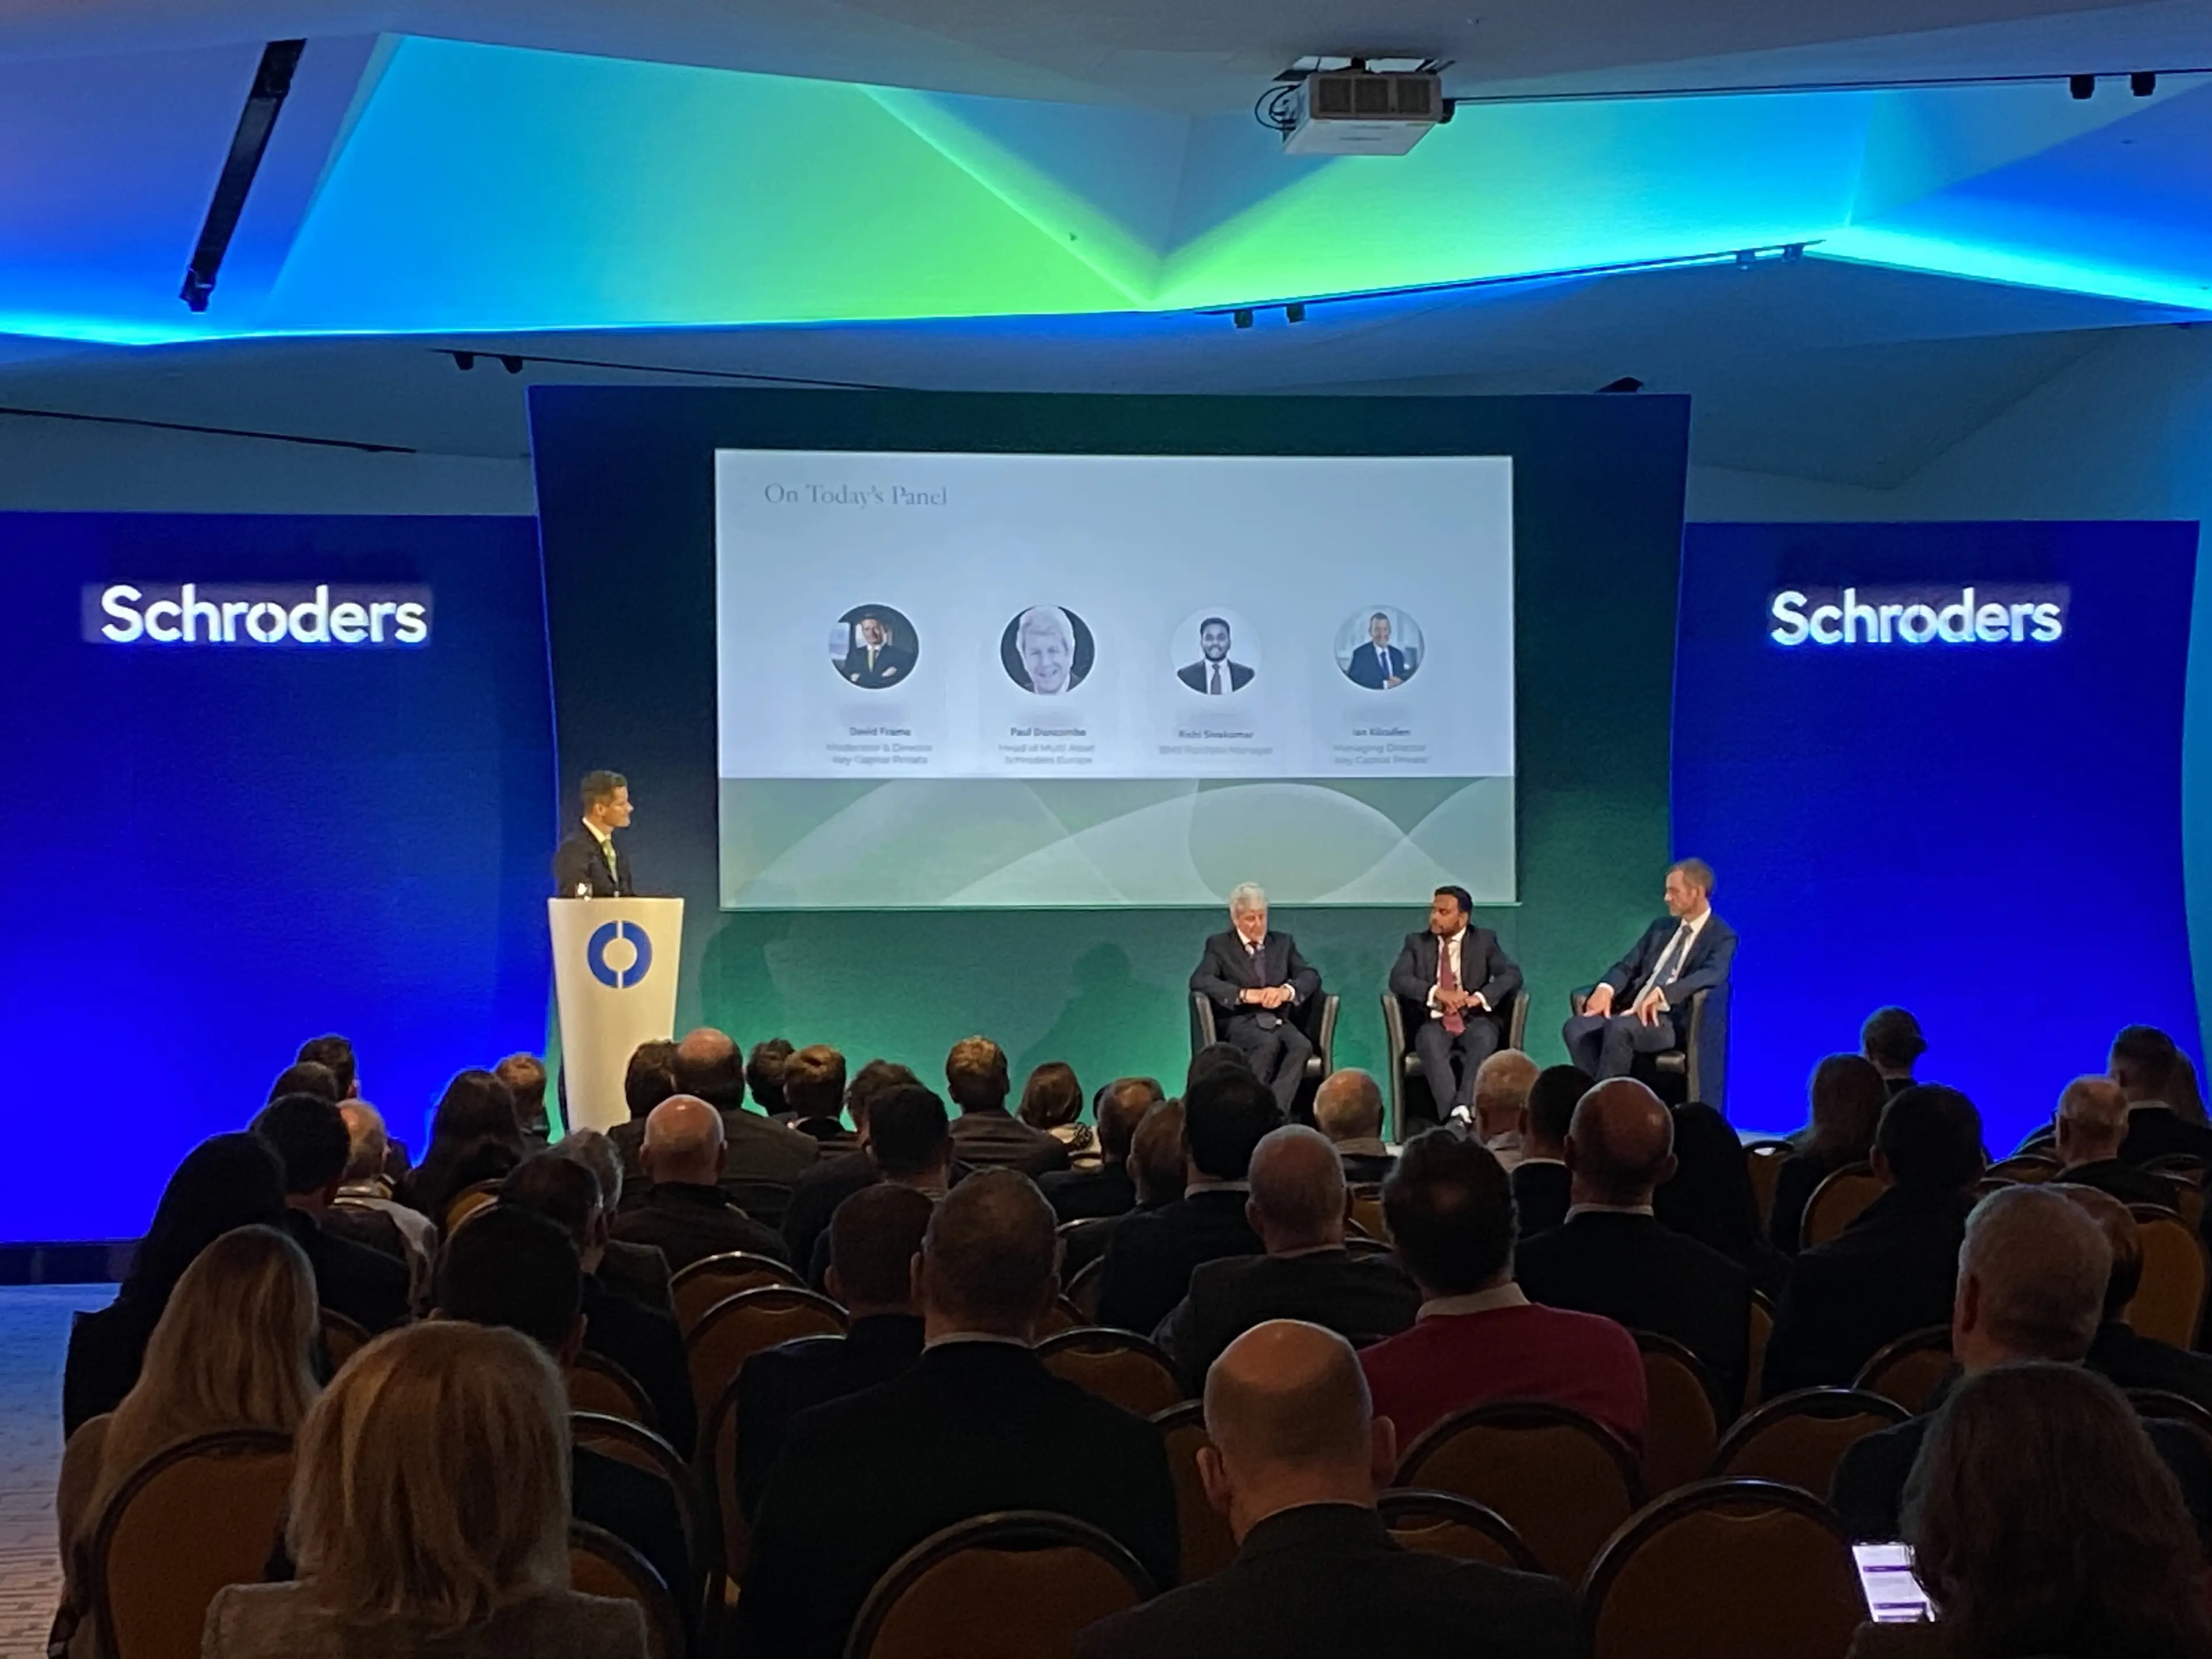 David Frame, Director, Wealth Management at Key Capital Private, moderated the panel including Paul Duncombe, Head of Multi Asset at Schroders Europe and Rishi Sivakumar, Balanced Multi Strategy Portfolio Manager at Schroders.